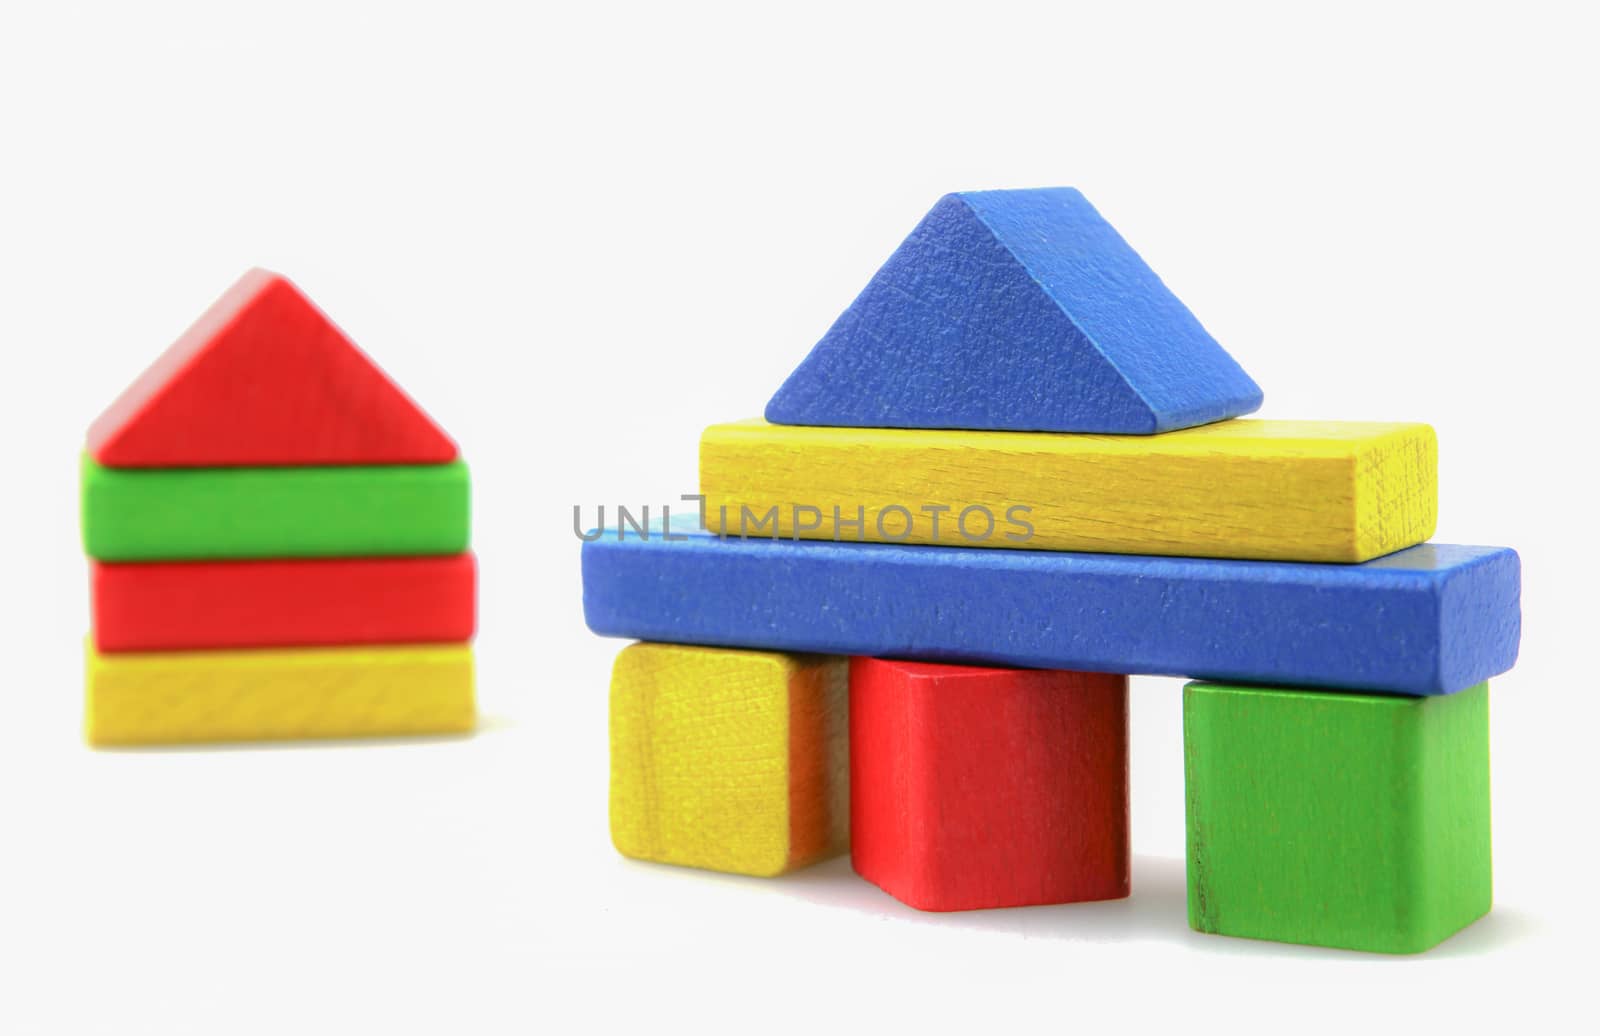 Colorful Wooden Building Blocks Toys Isolated On White by nenovbrothers